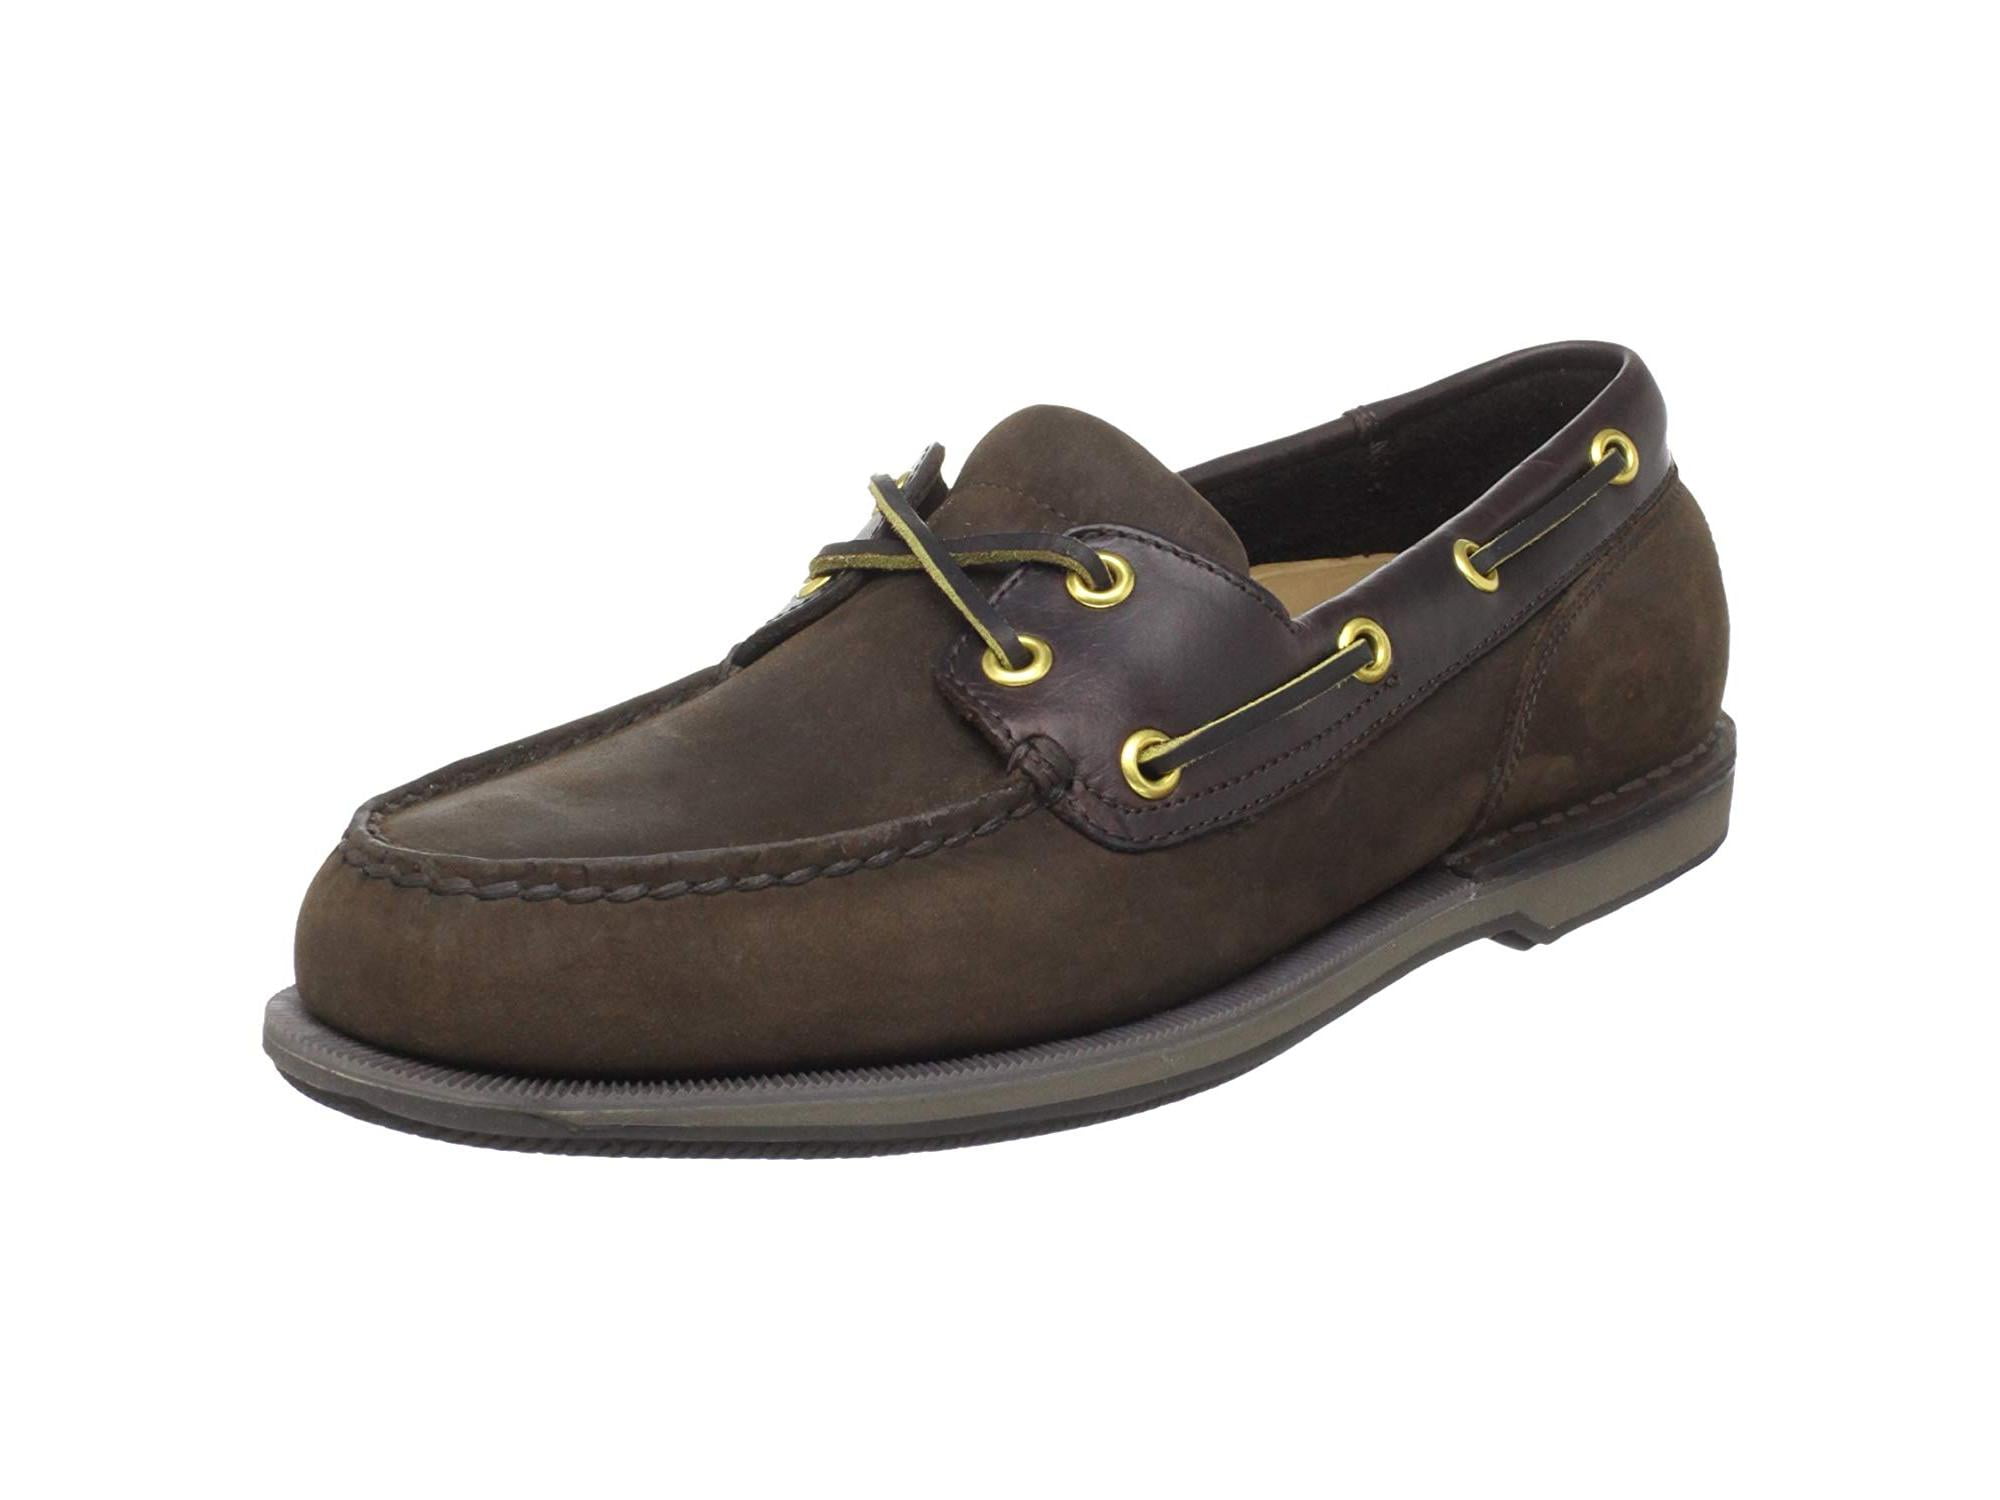 rockport casual dress shoes